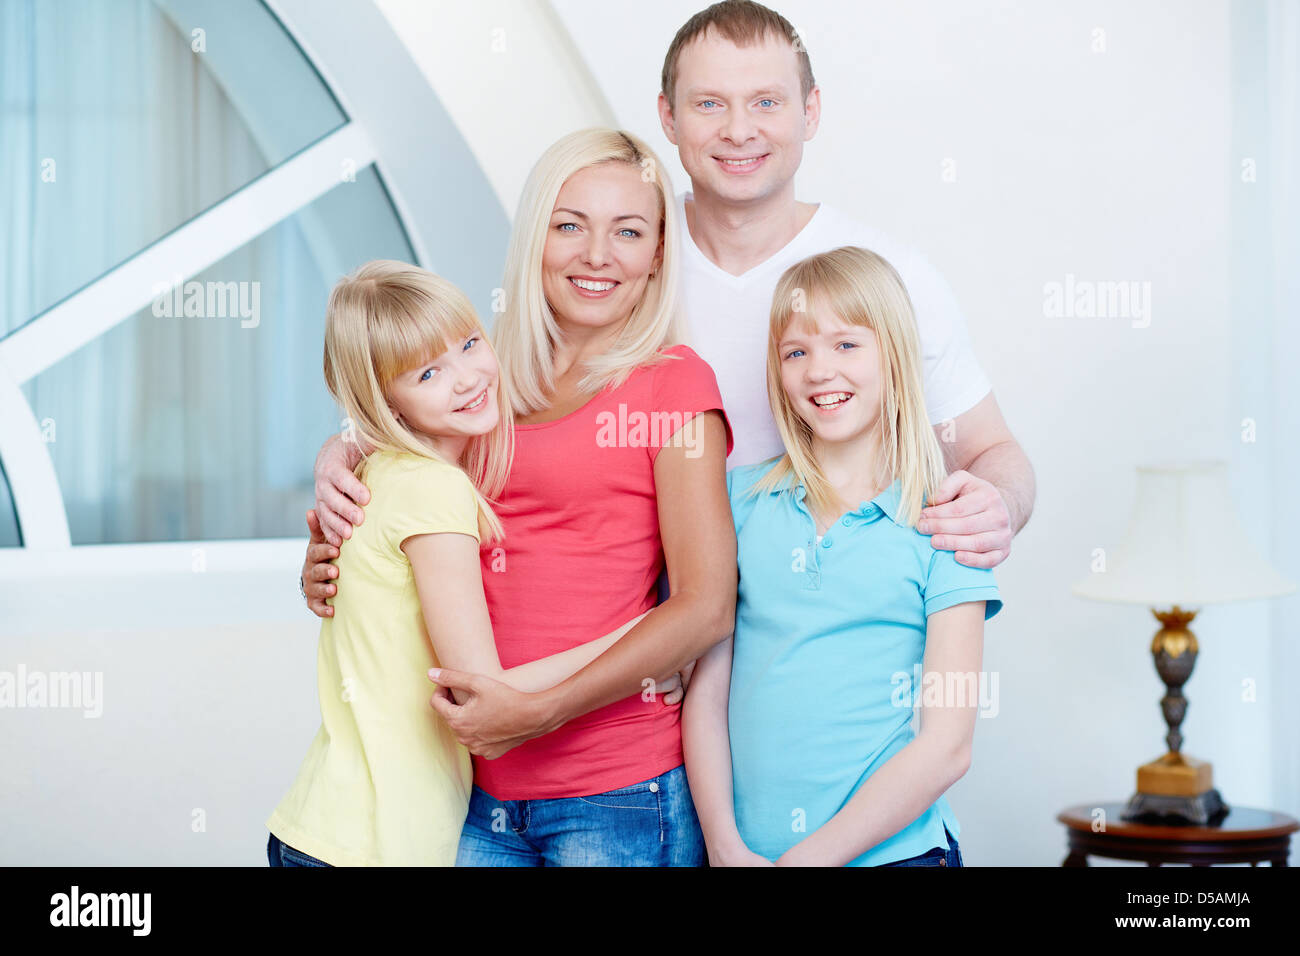 Portrait of a perfect family with positive attitude Stock Photo